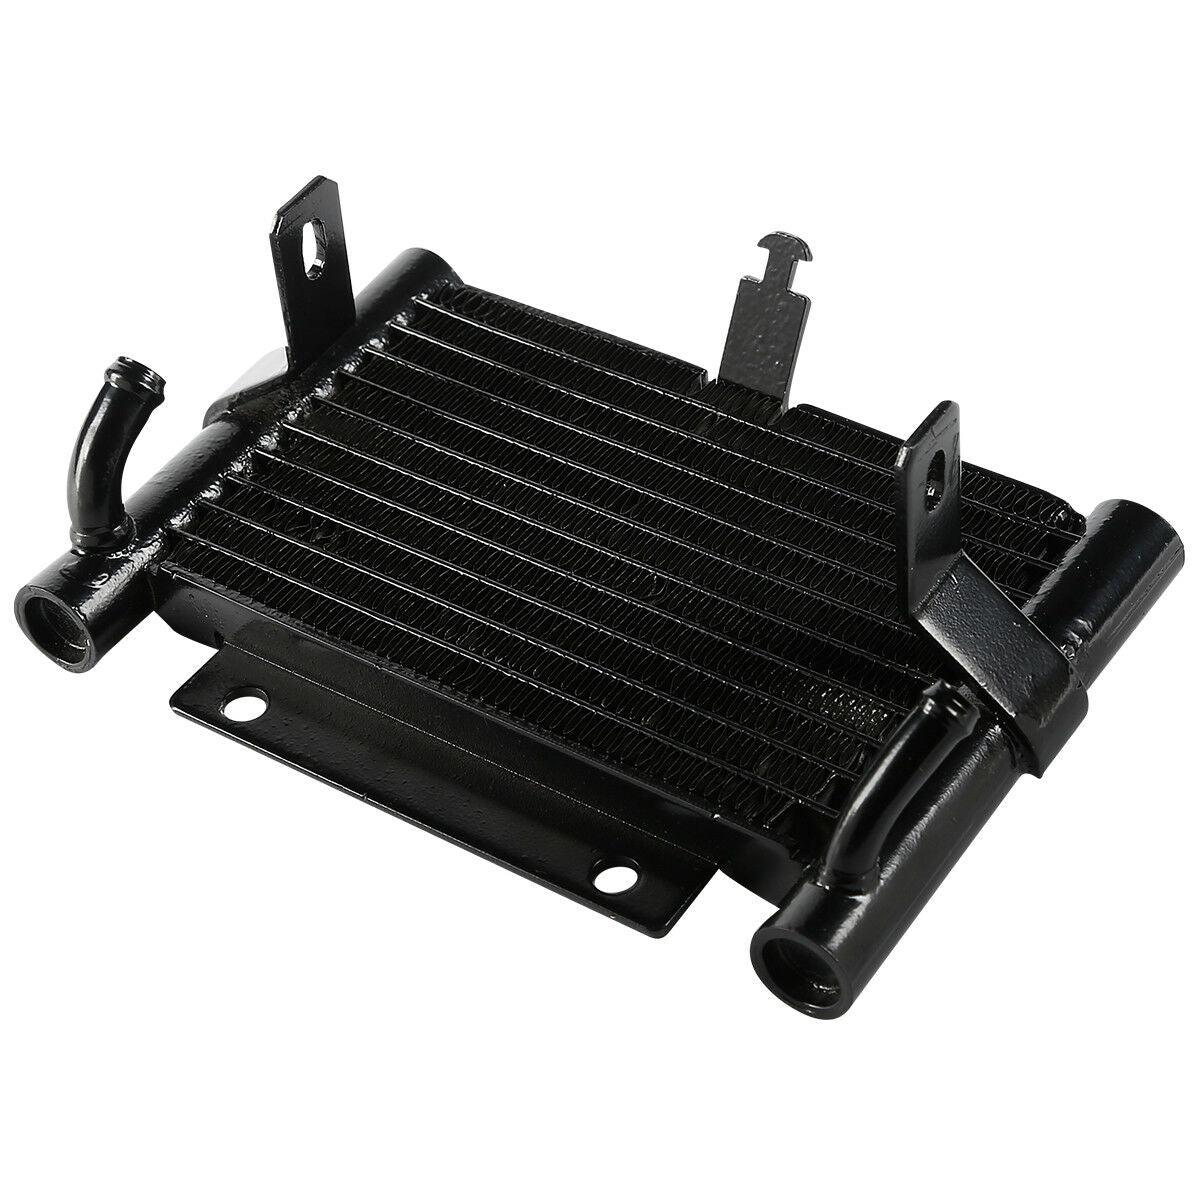 Black Oil Cooler Fit For Harley Touring Road King Road Street Glide 2017-2021 20 - Moto Life Products